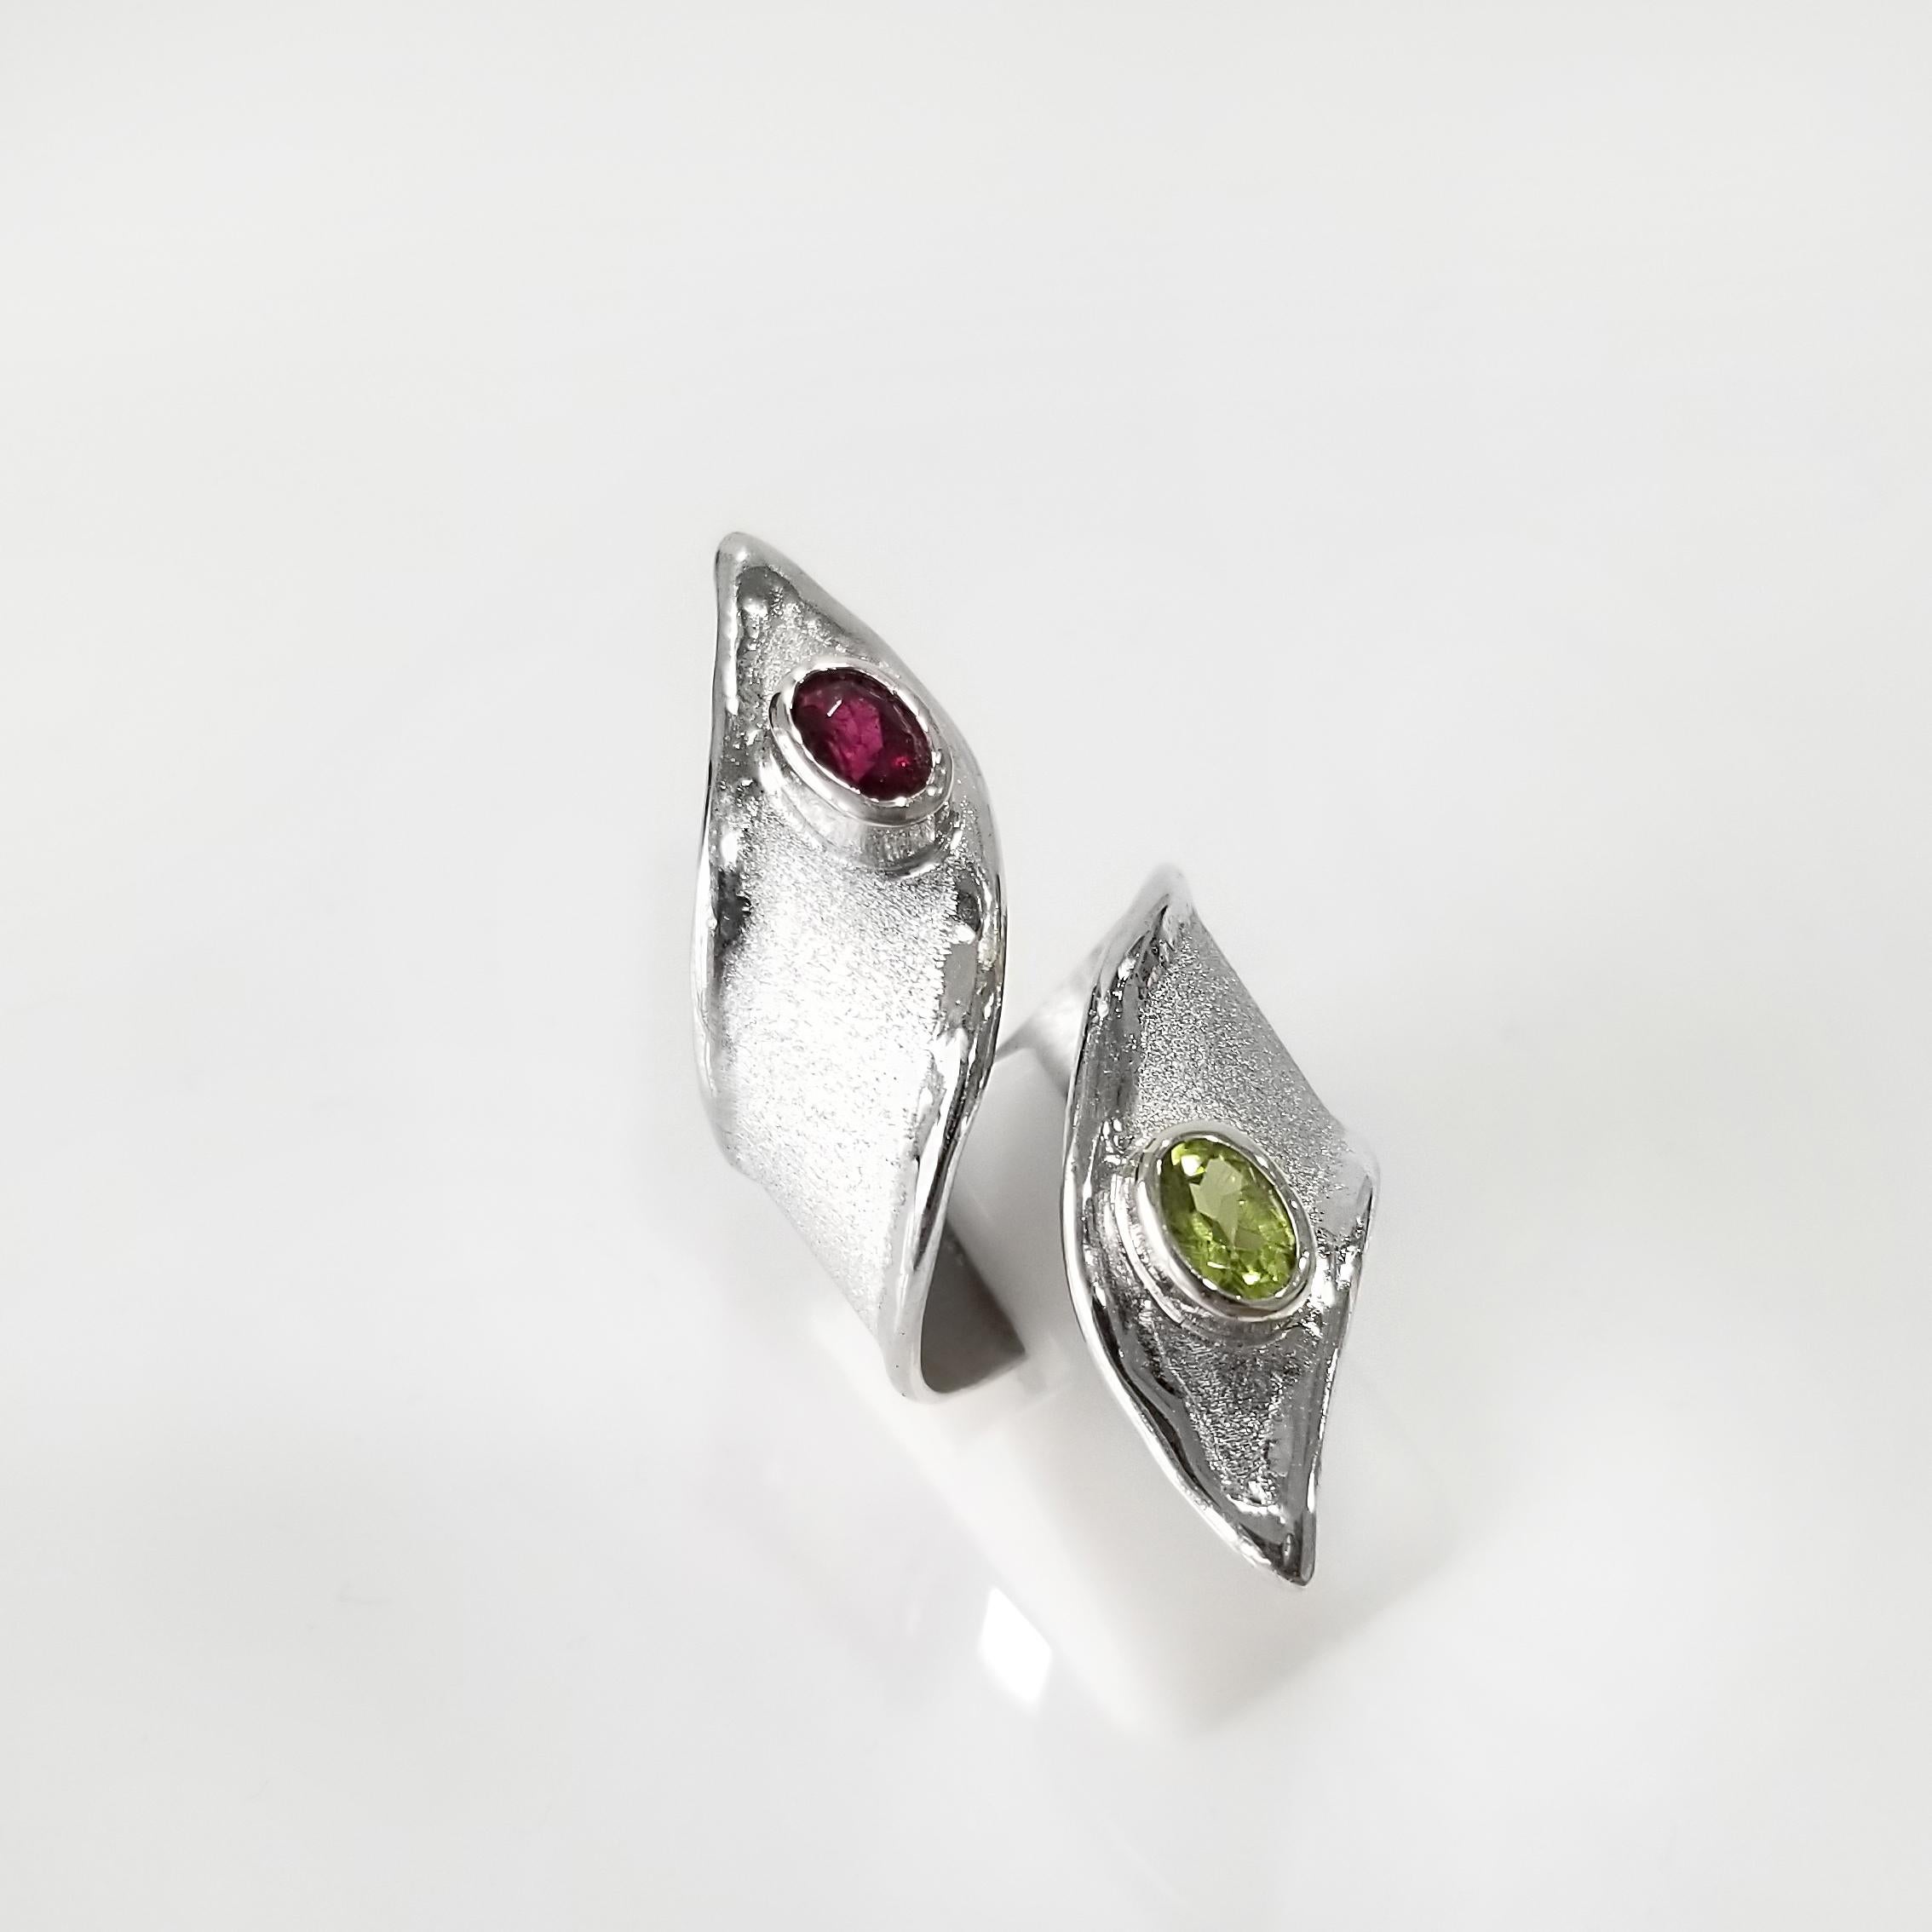 Contemporary Yianni Creations Peridot and Garner Fine Silver and Palladium Asymmetrical Ring